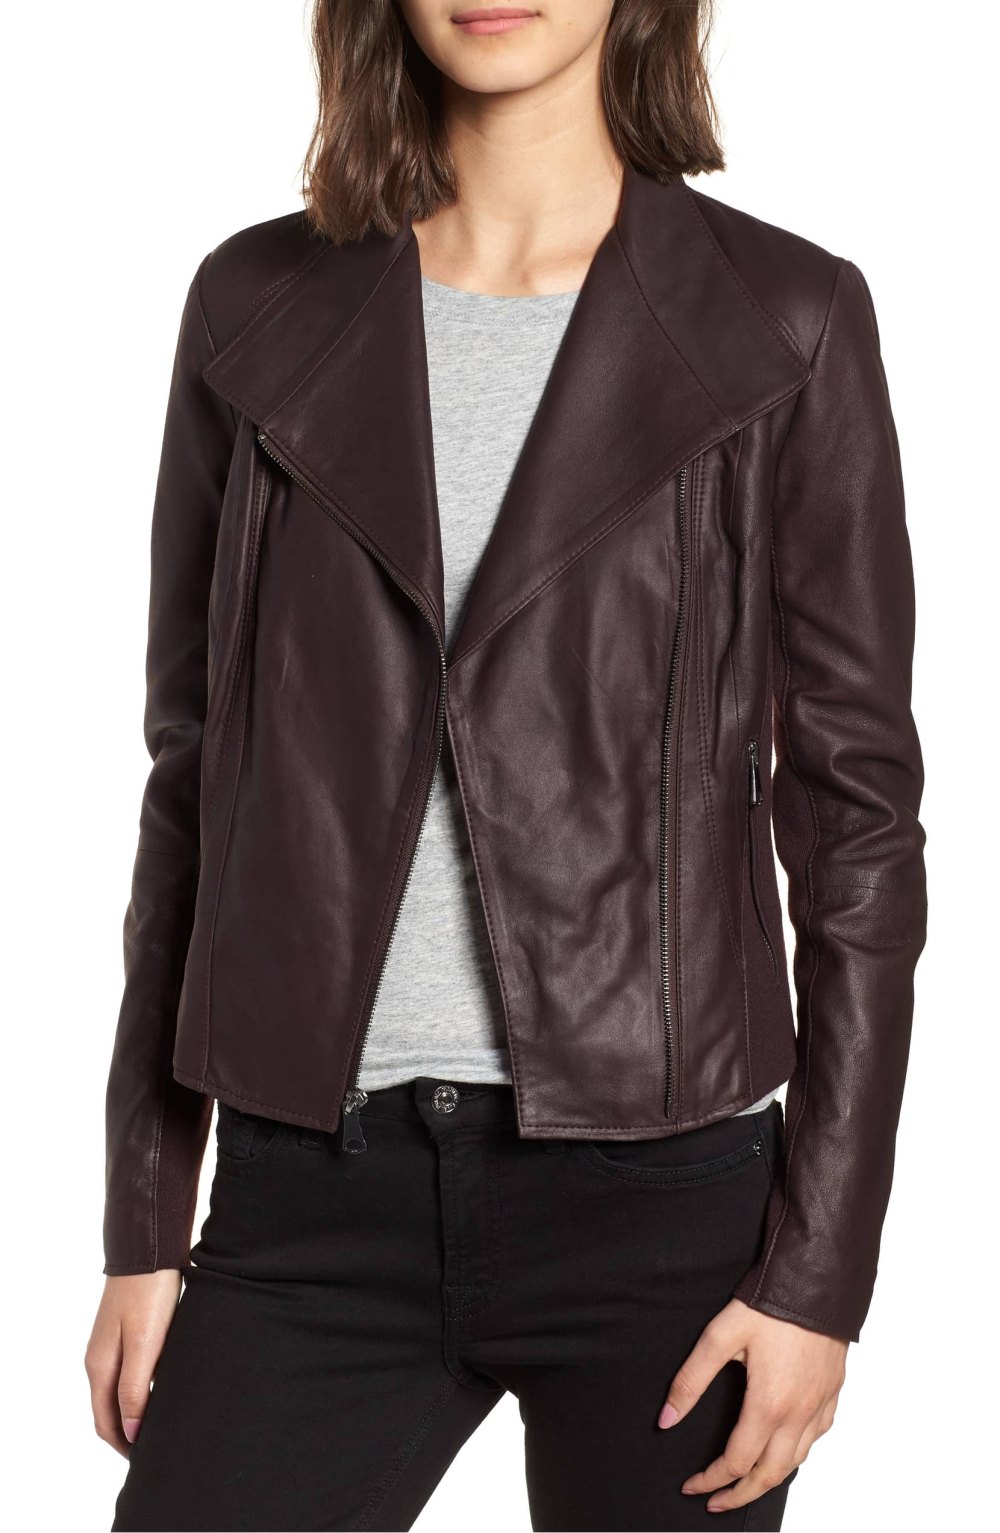 This Leather Jacket Is Nearly Half Off in the Nordstrom Sale